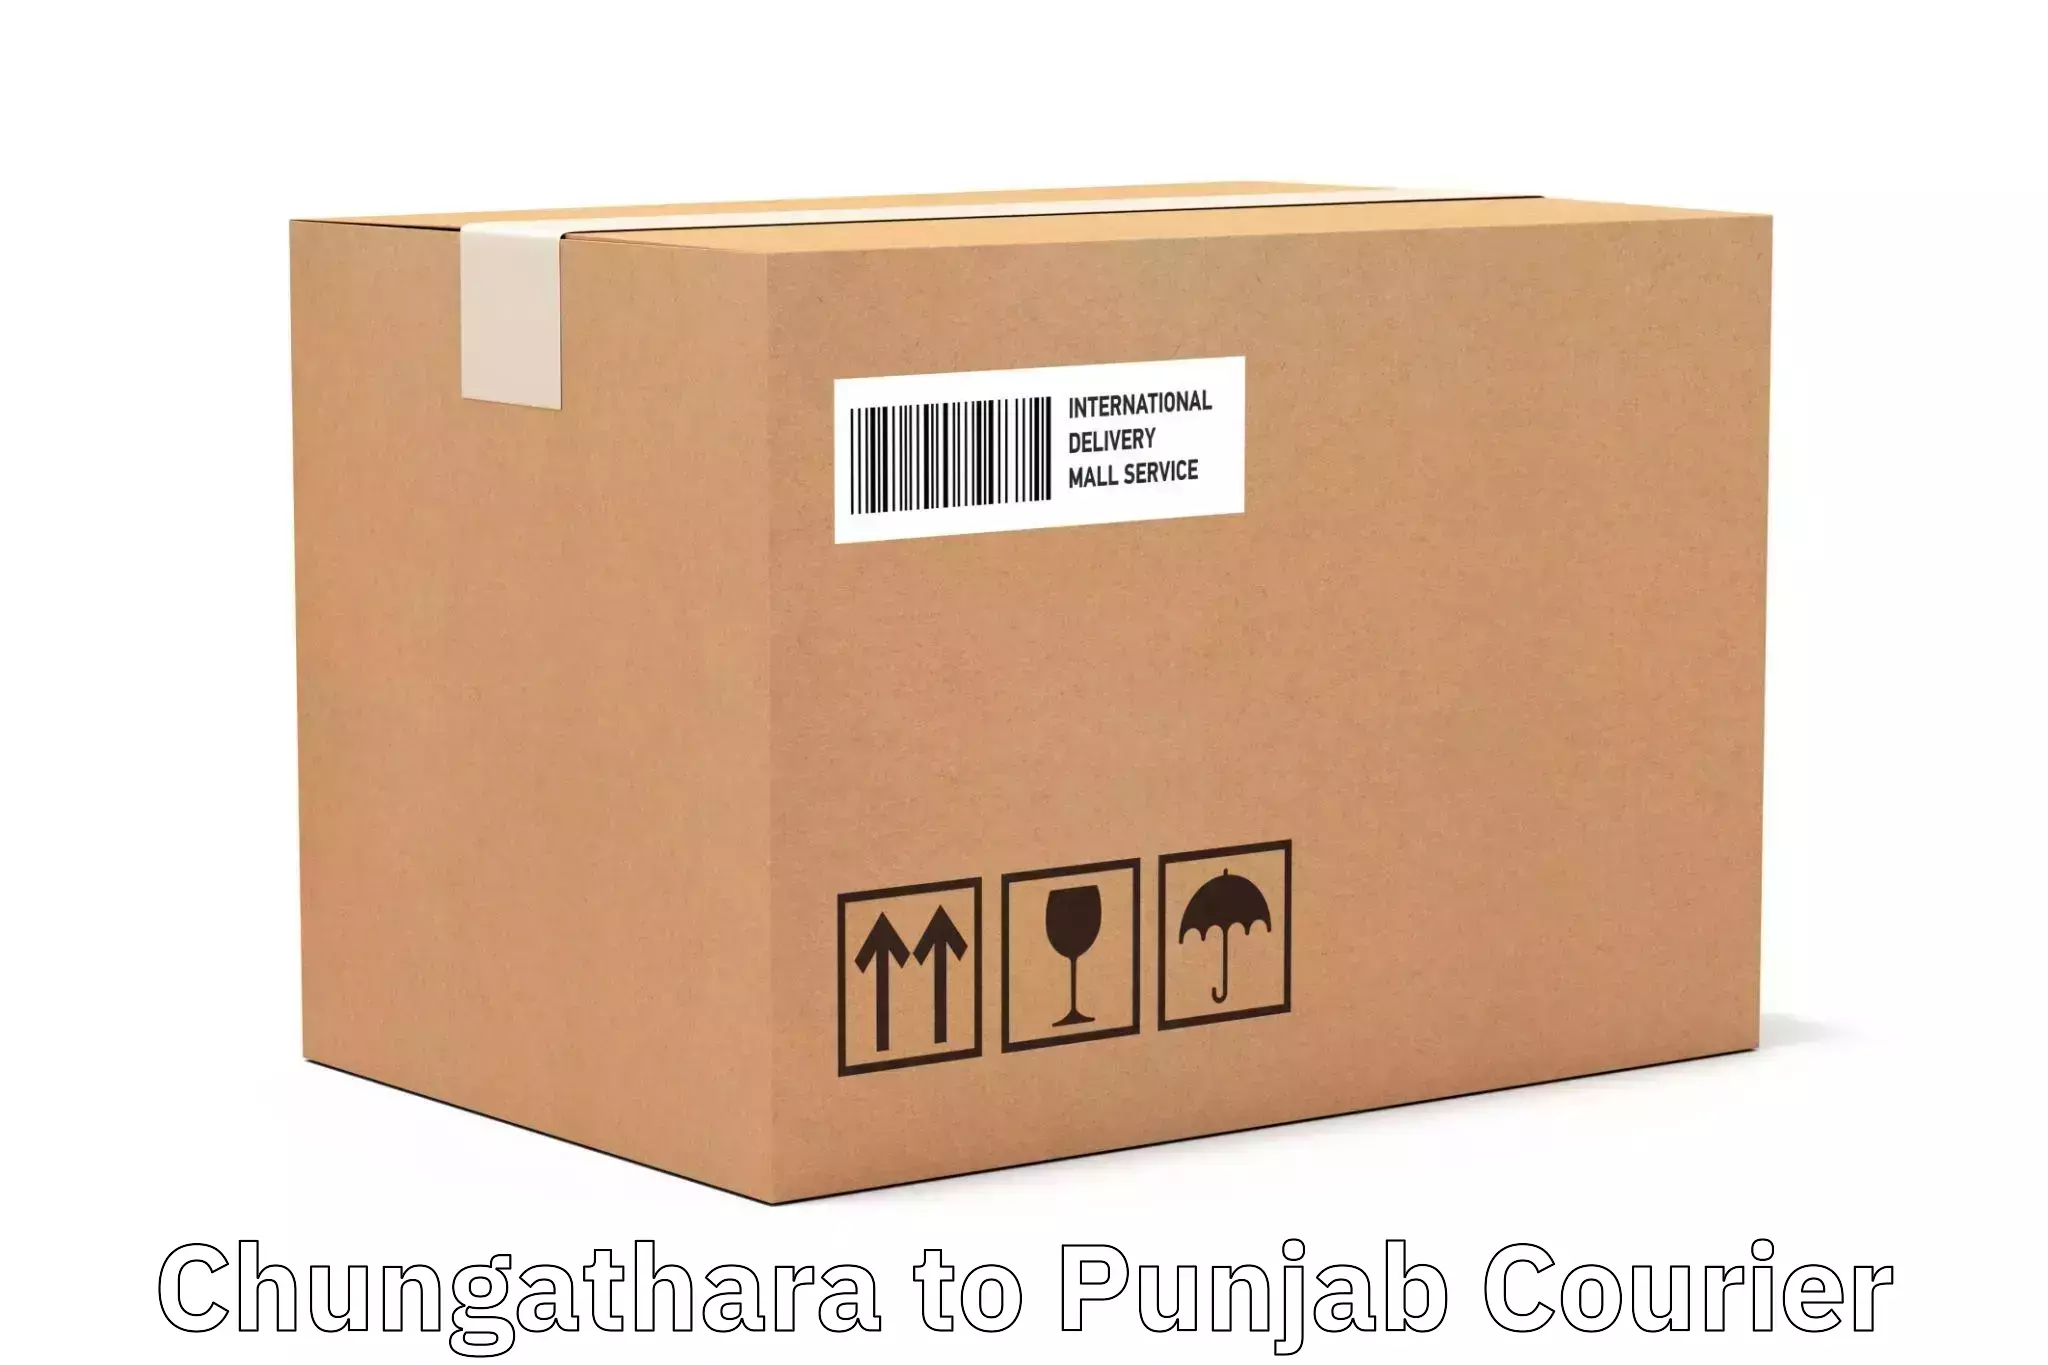 Customized delivery options in Chungathara to Patiala